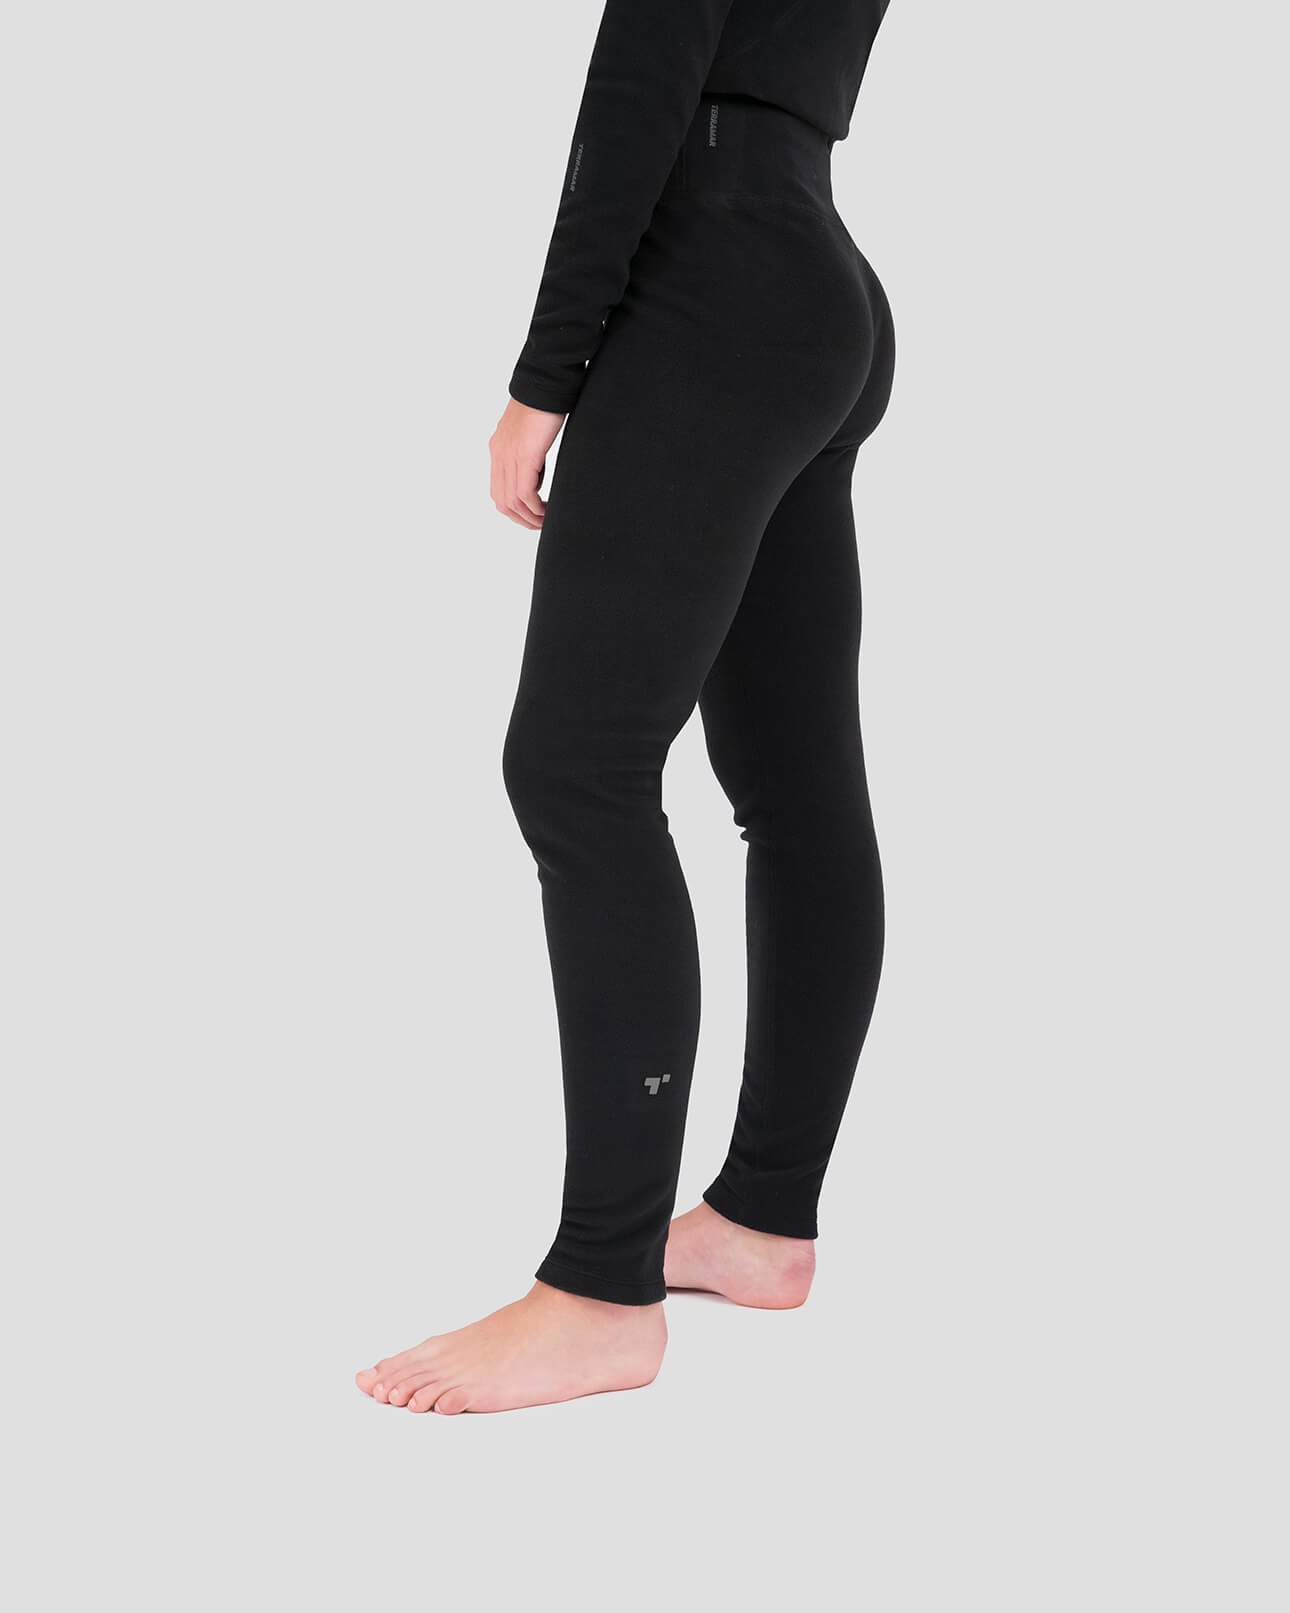 Women's Heritage Expedition Weight Fleece Thermal Pants | Color: Black